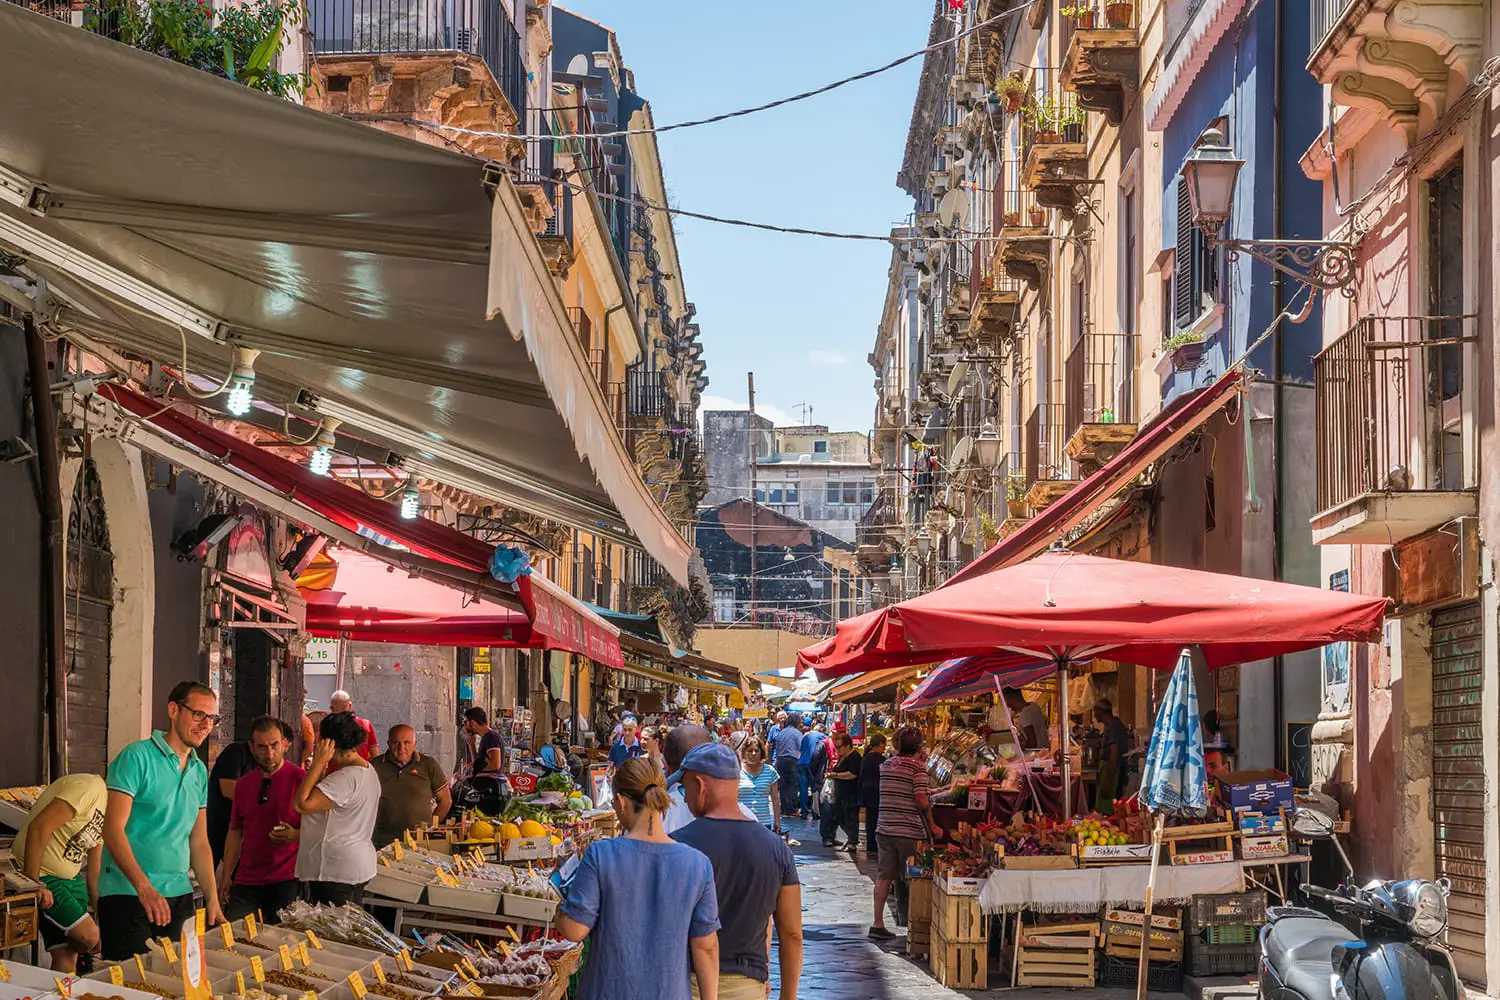 The colorful and vivid market of Catania, Italy